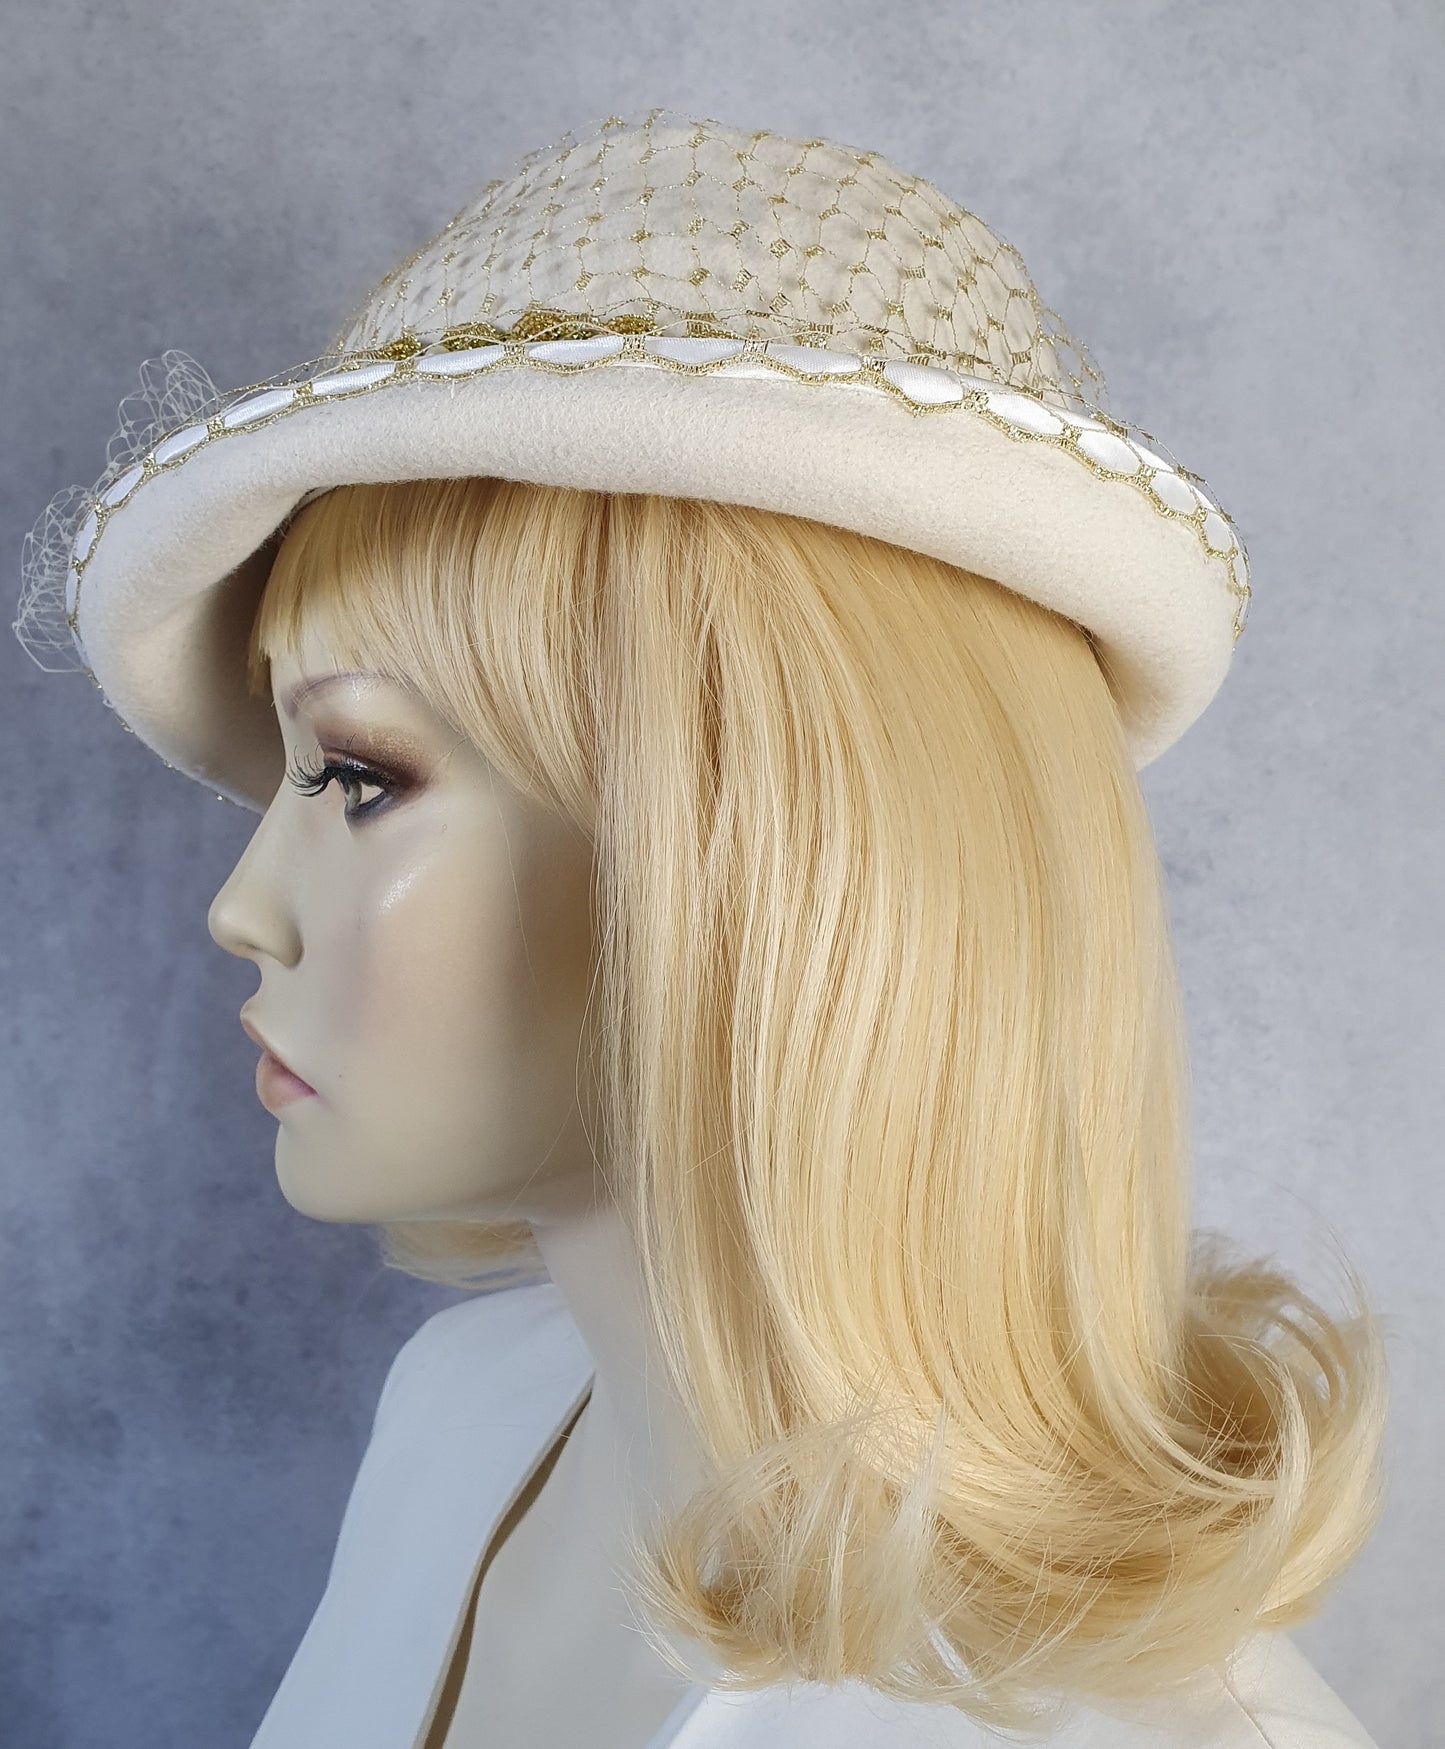 Women's hat Fedora made of ecru white felt with veil, handmade elegant bridal hat, for weddings or other special events.